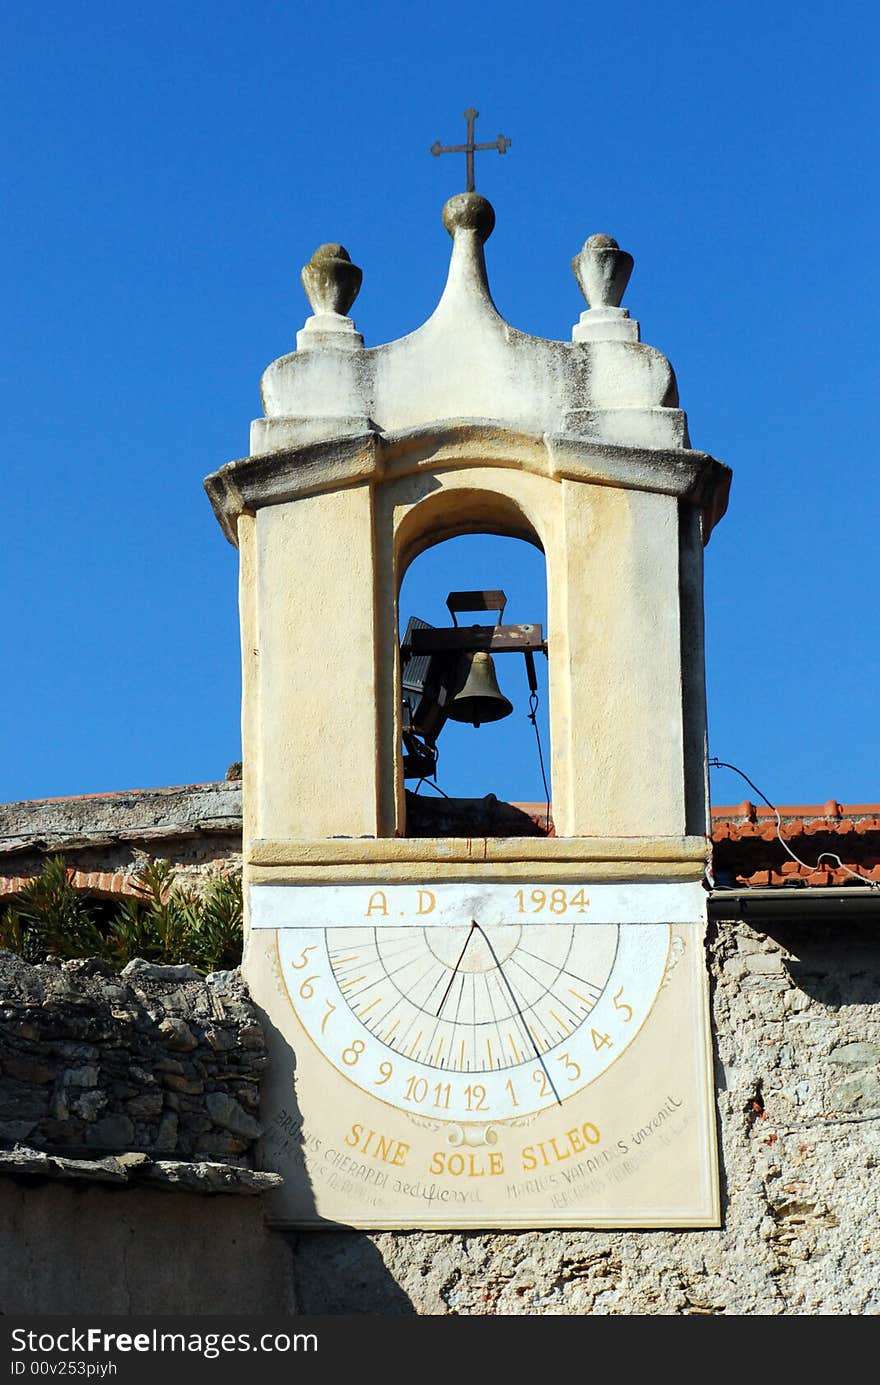 Little bell tower of a church in Liguria, Italy. Little bell tower of a church in Liguria, Italy